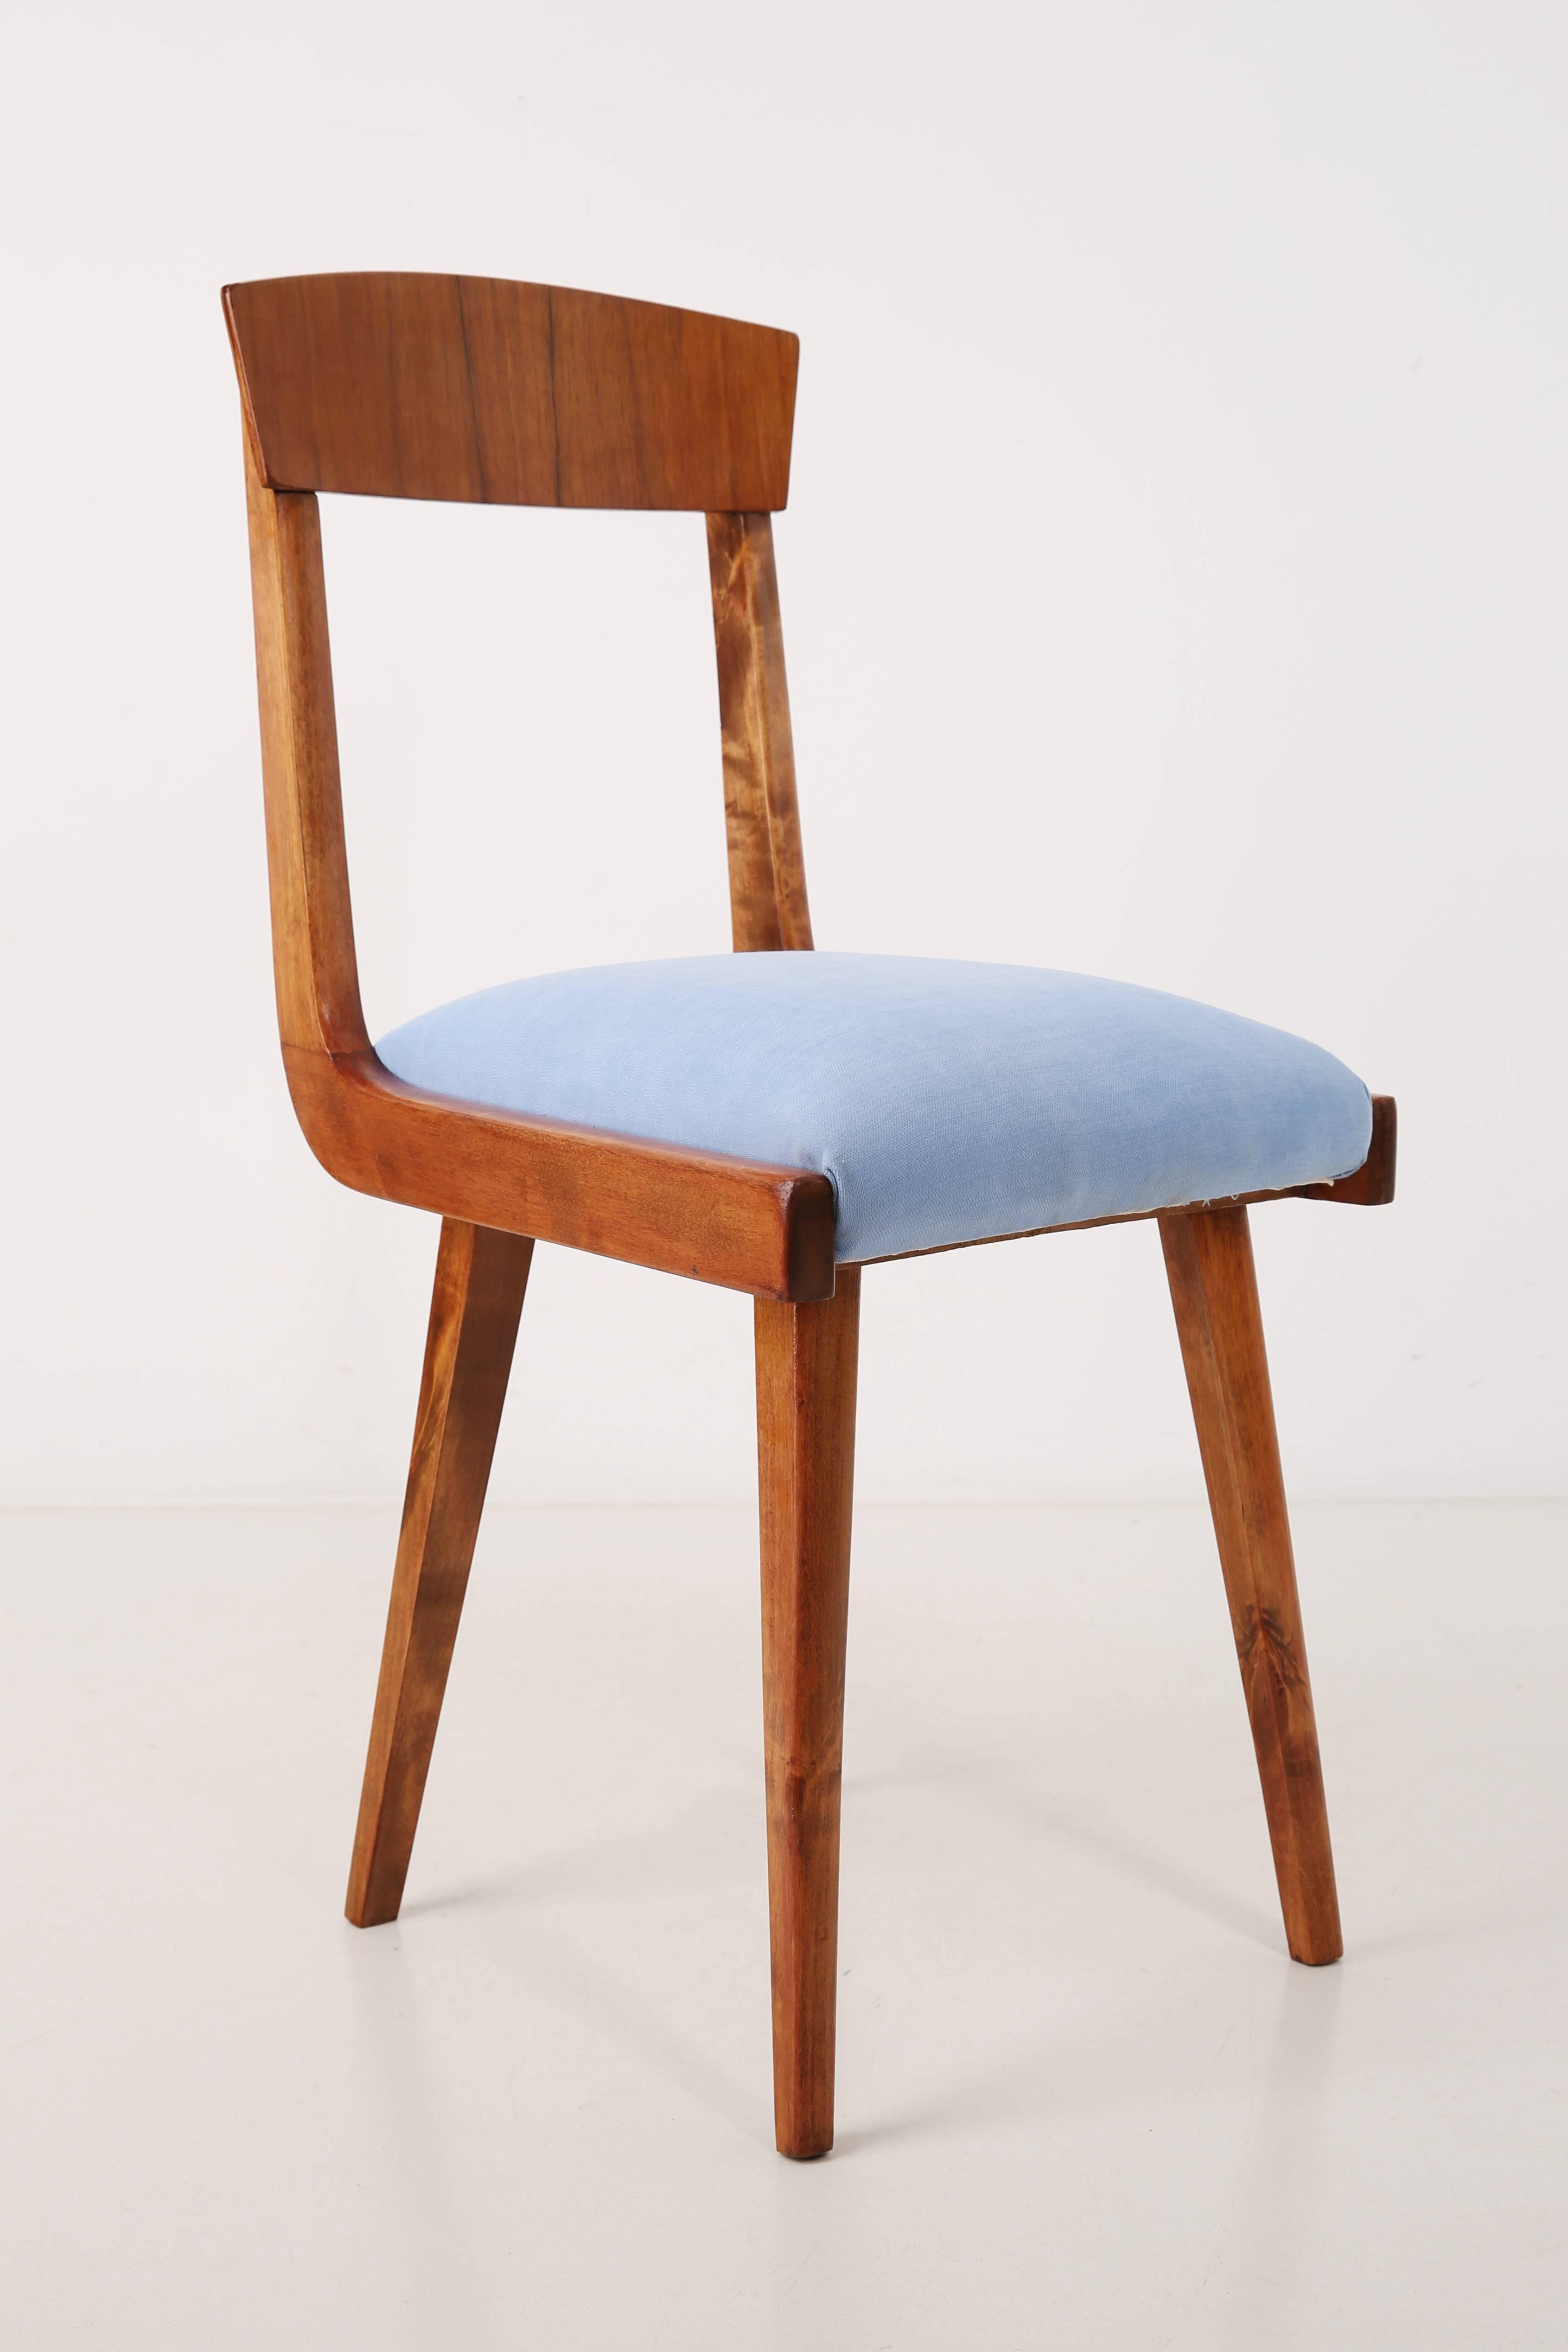 Hand-Crafted Set of Two Mid Century Baby Blue Velvet and Medium Wood Chairs, Europe, 1960s For Sale